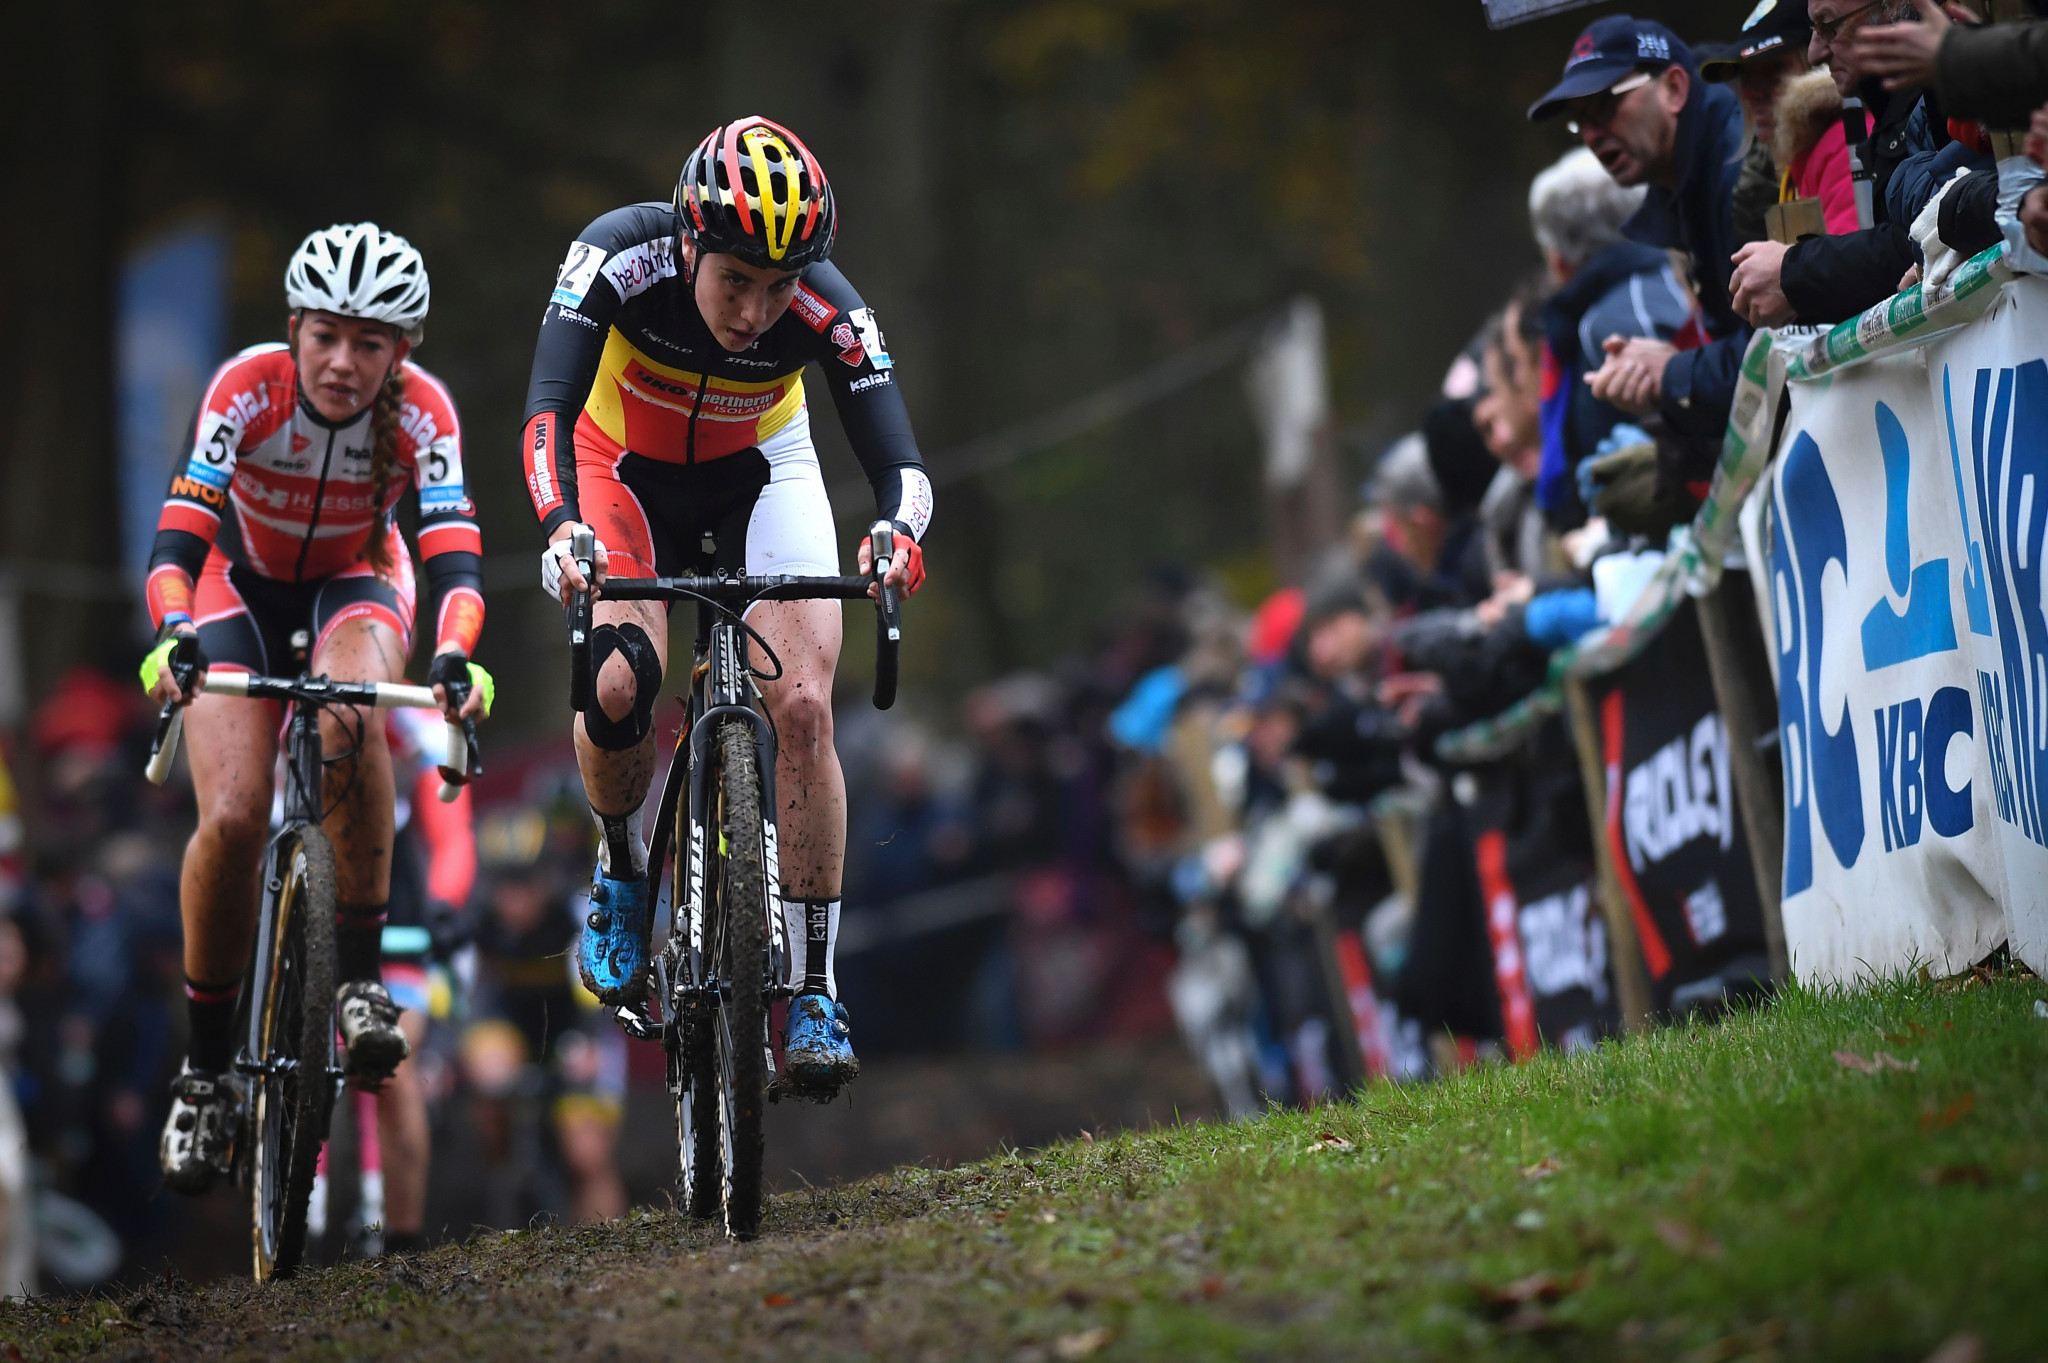 Belgium's Sanne Cant will be out to delight the home crowd in the women's event ©Getty Images